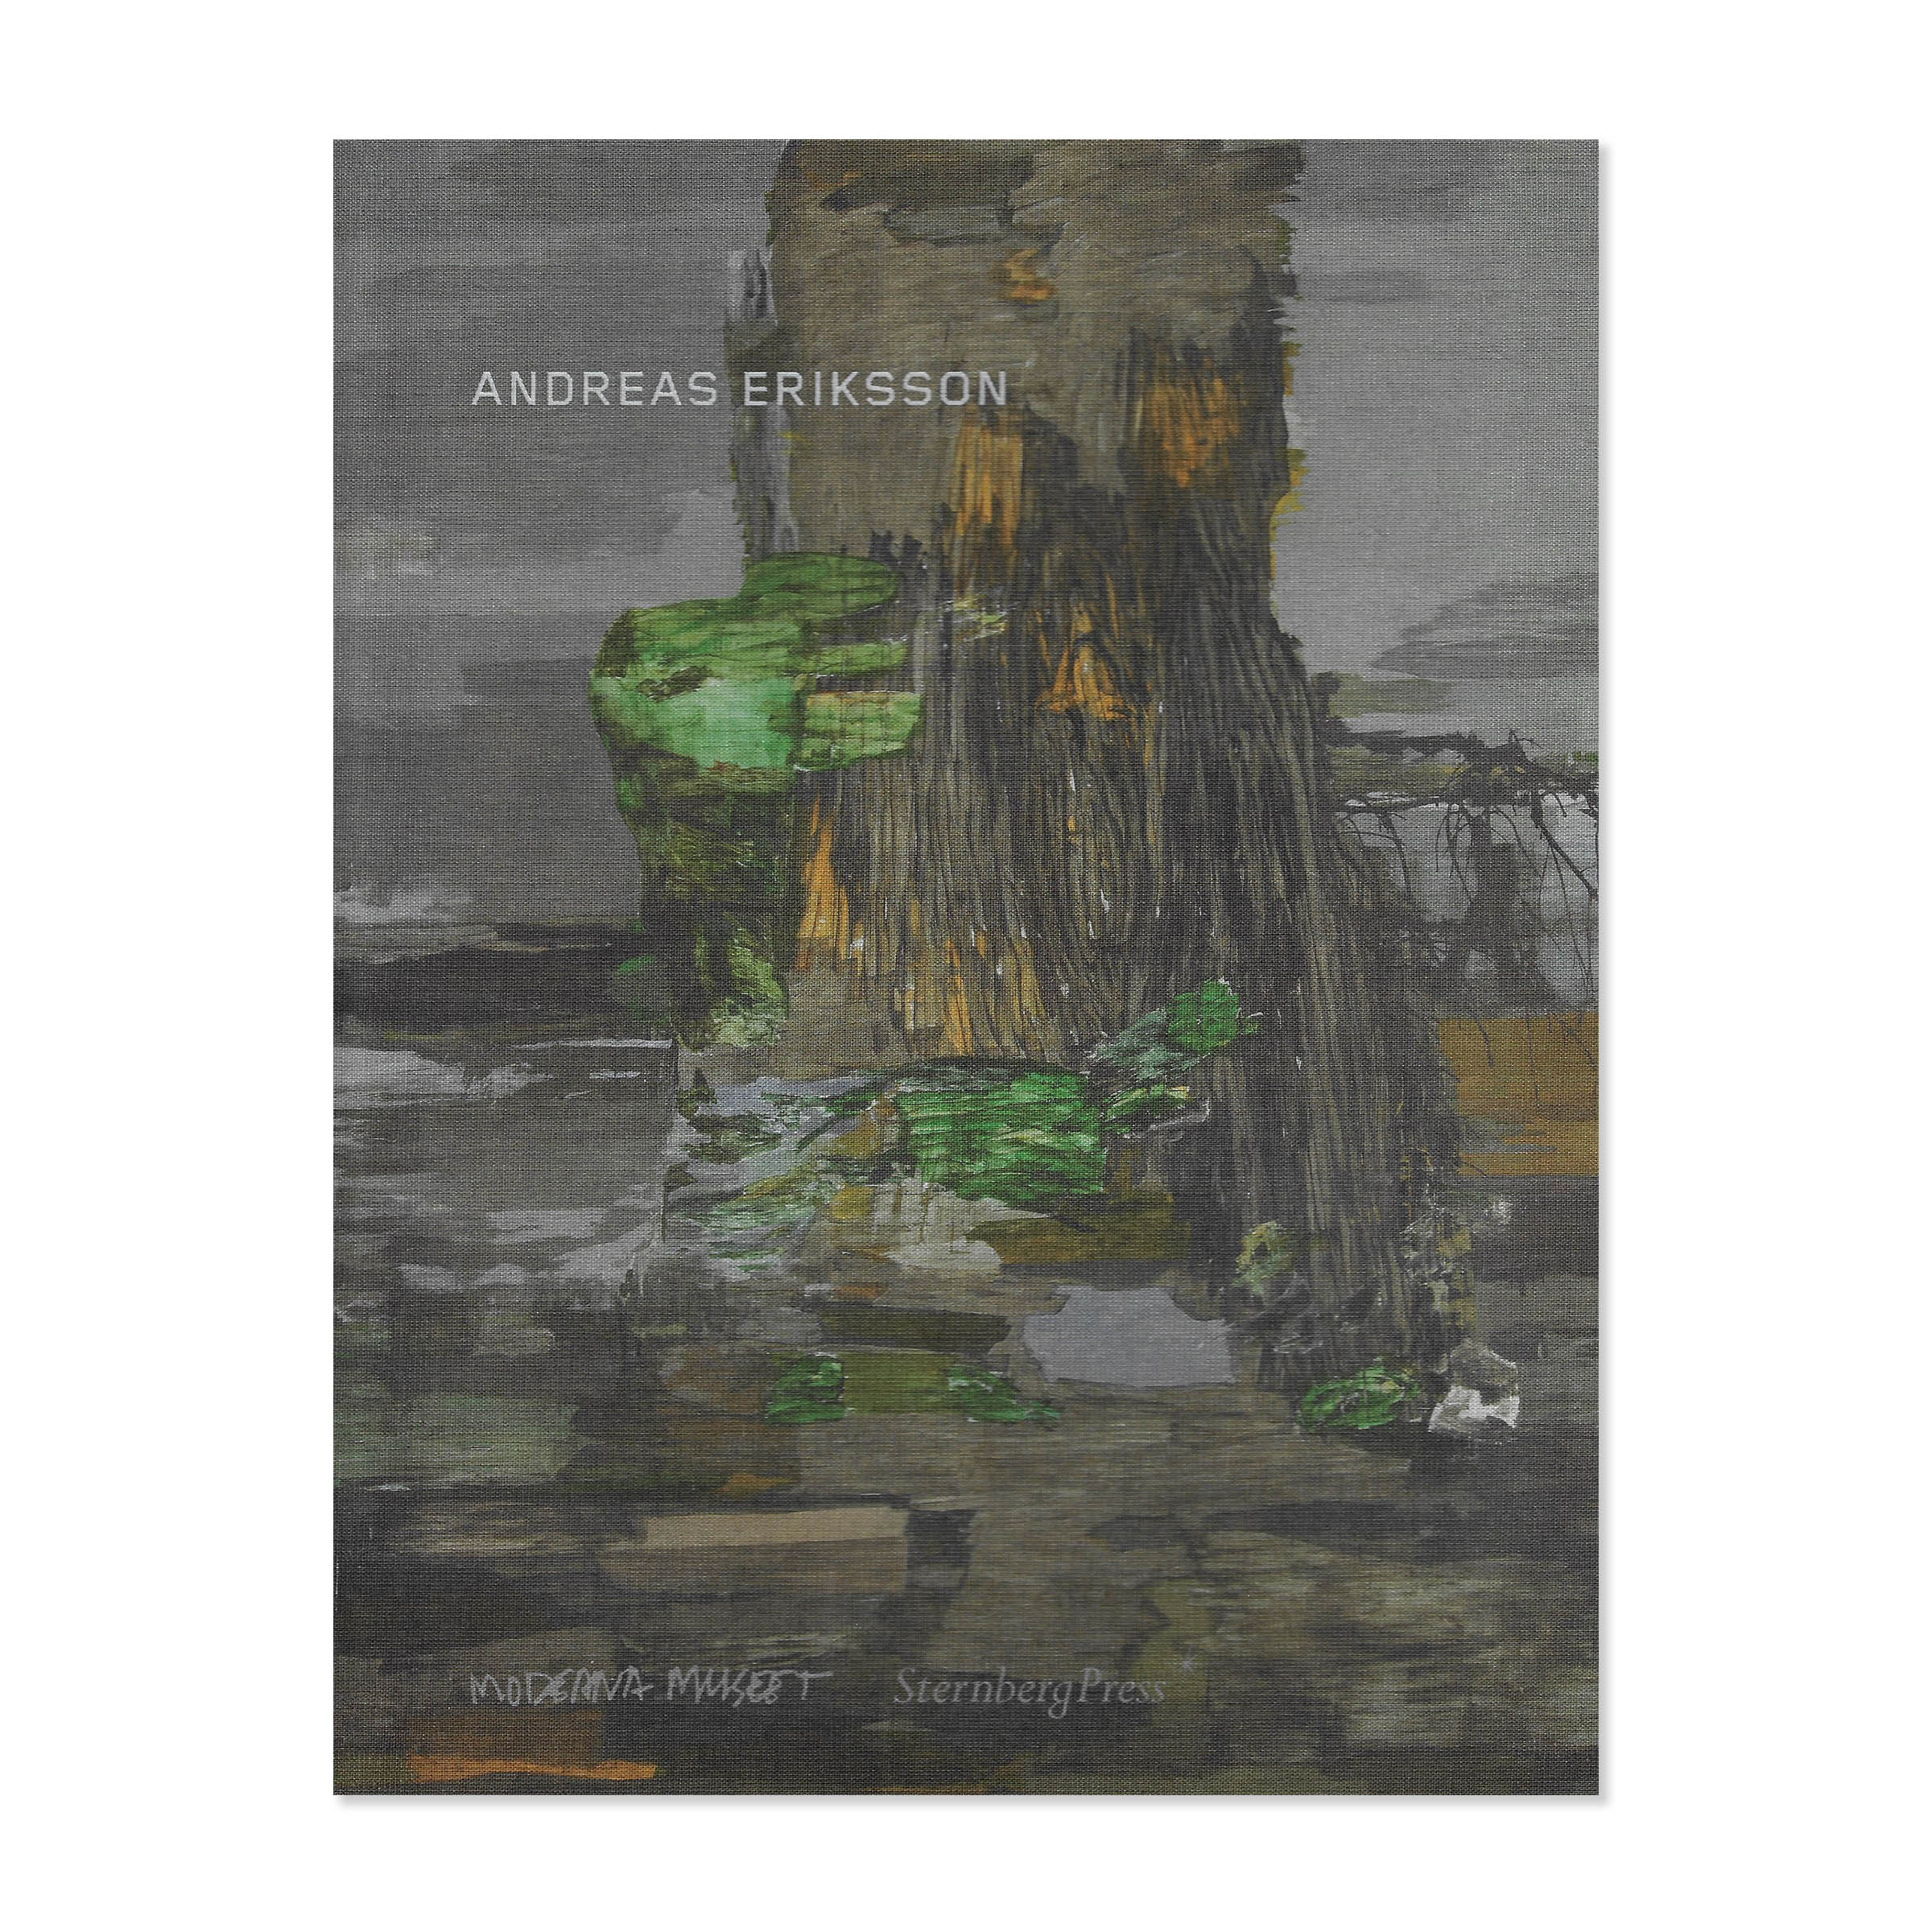 Andreas Eriksson. Moderna Museet. Cover view